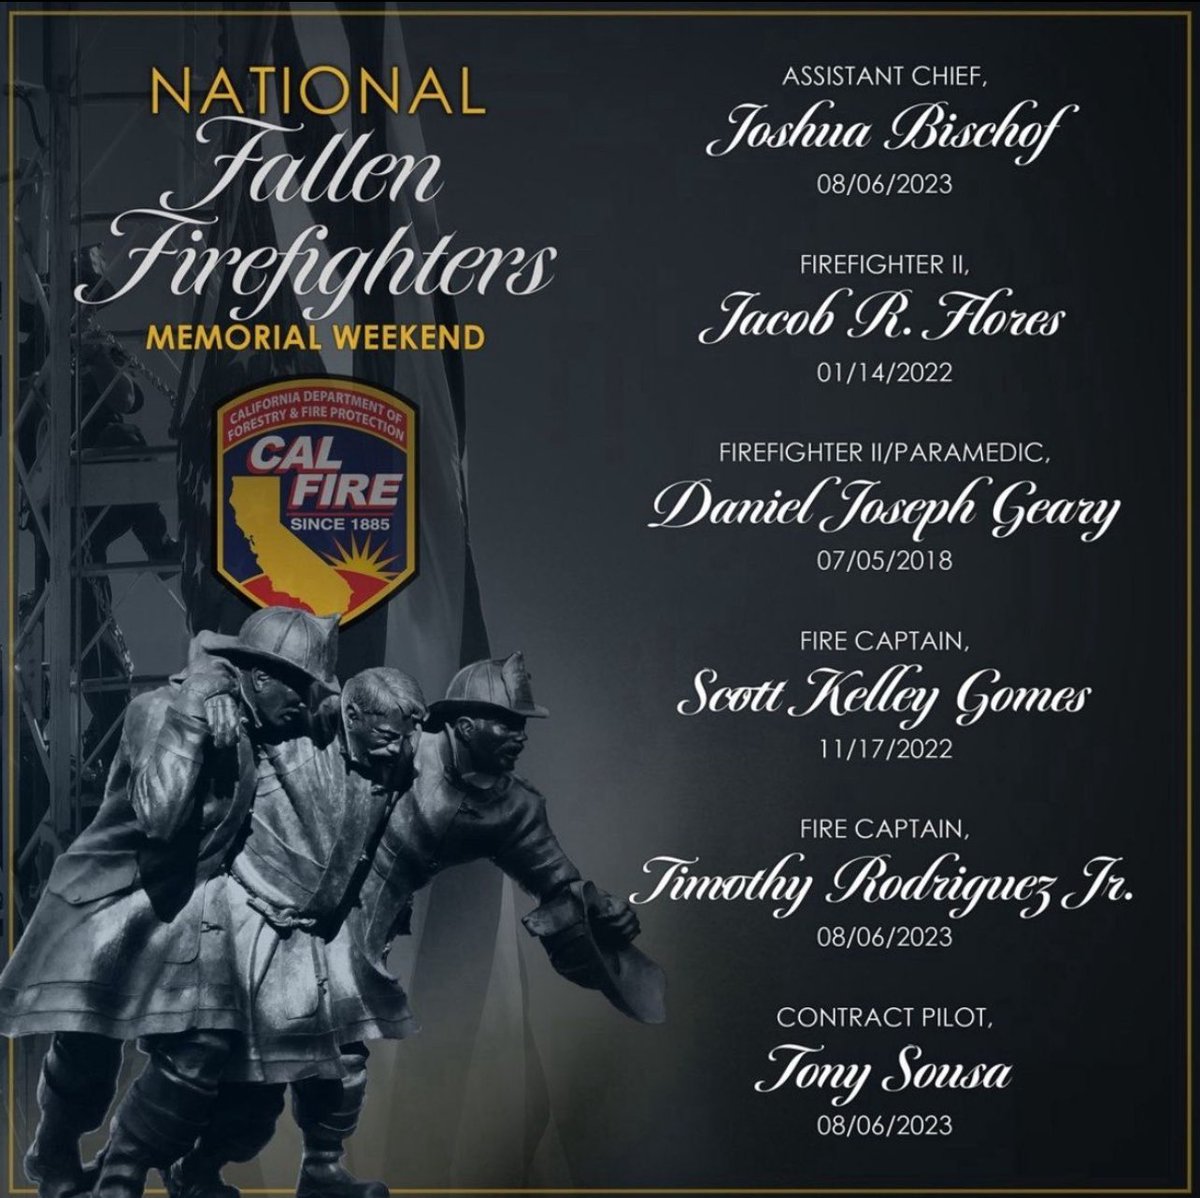 #NationalFallenFirefighters Memorial Weekend, honors the memory of five #CALFIRE Firefighters and one CAL FIRE Contract Pilot, whose names will be added to the National Fallen Firefighters Memorial in Emmitsburg, Maryland. #NeverForget